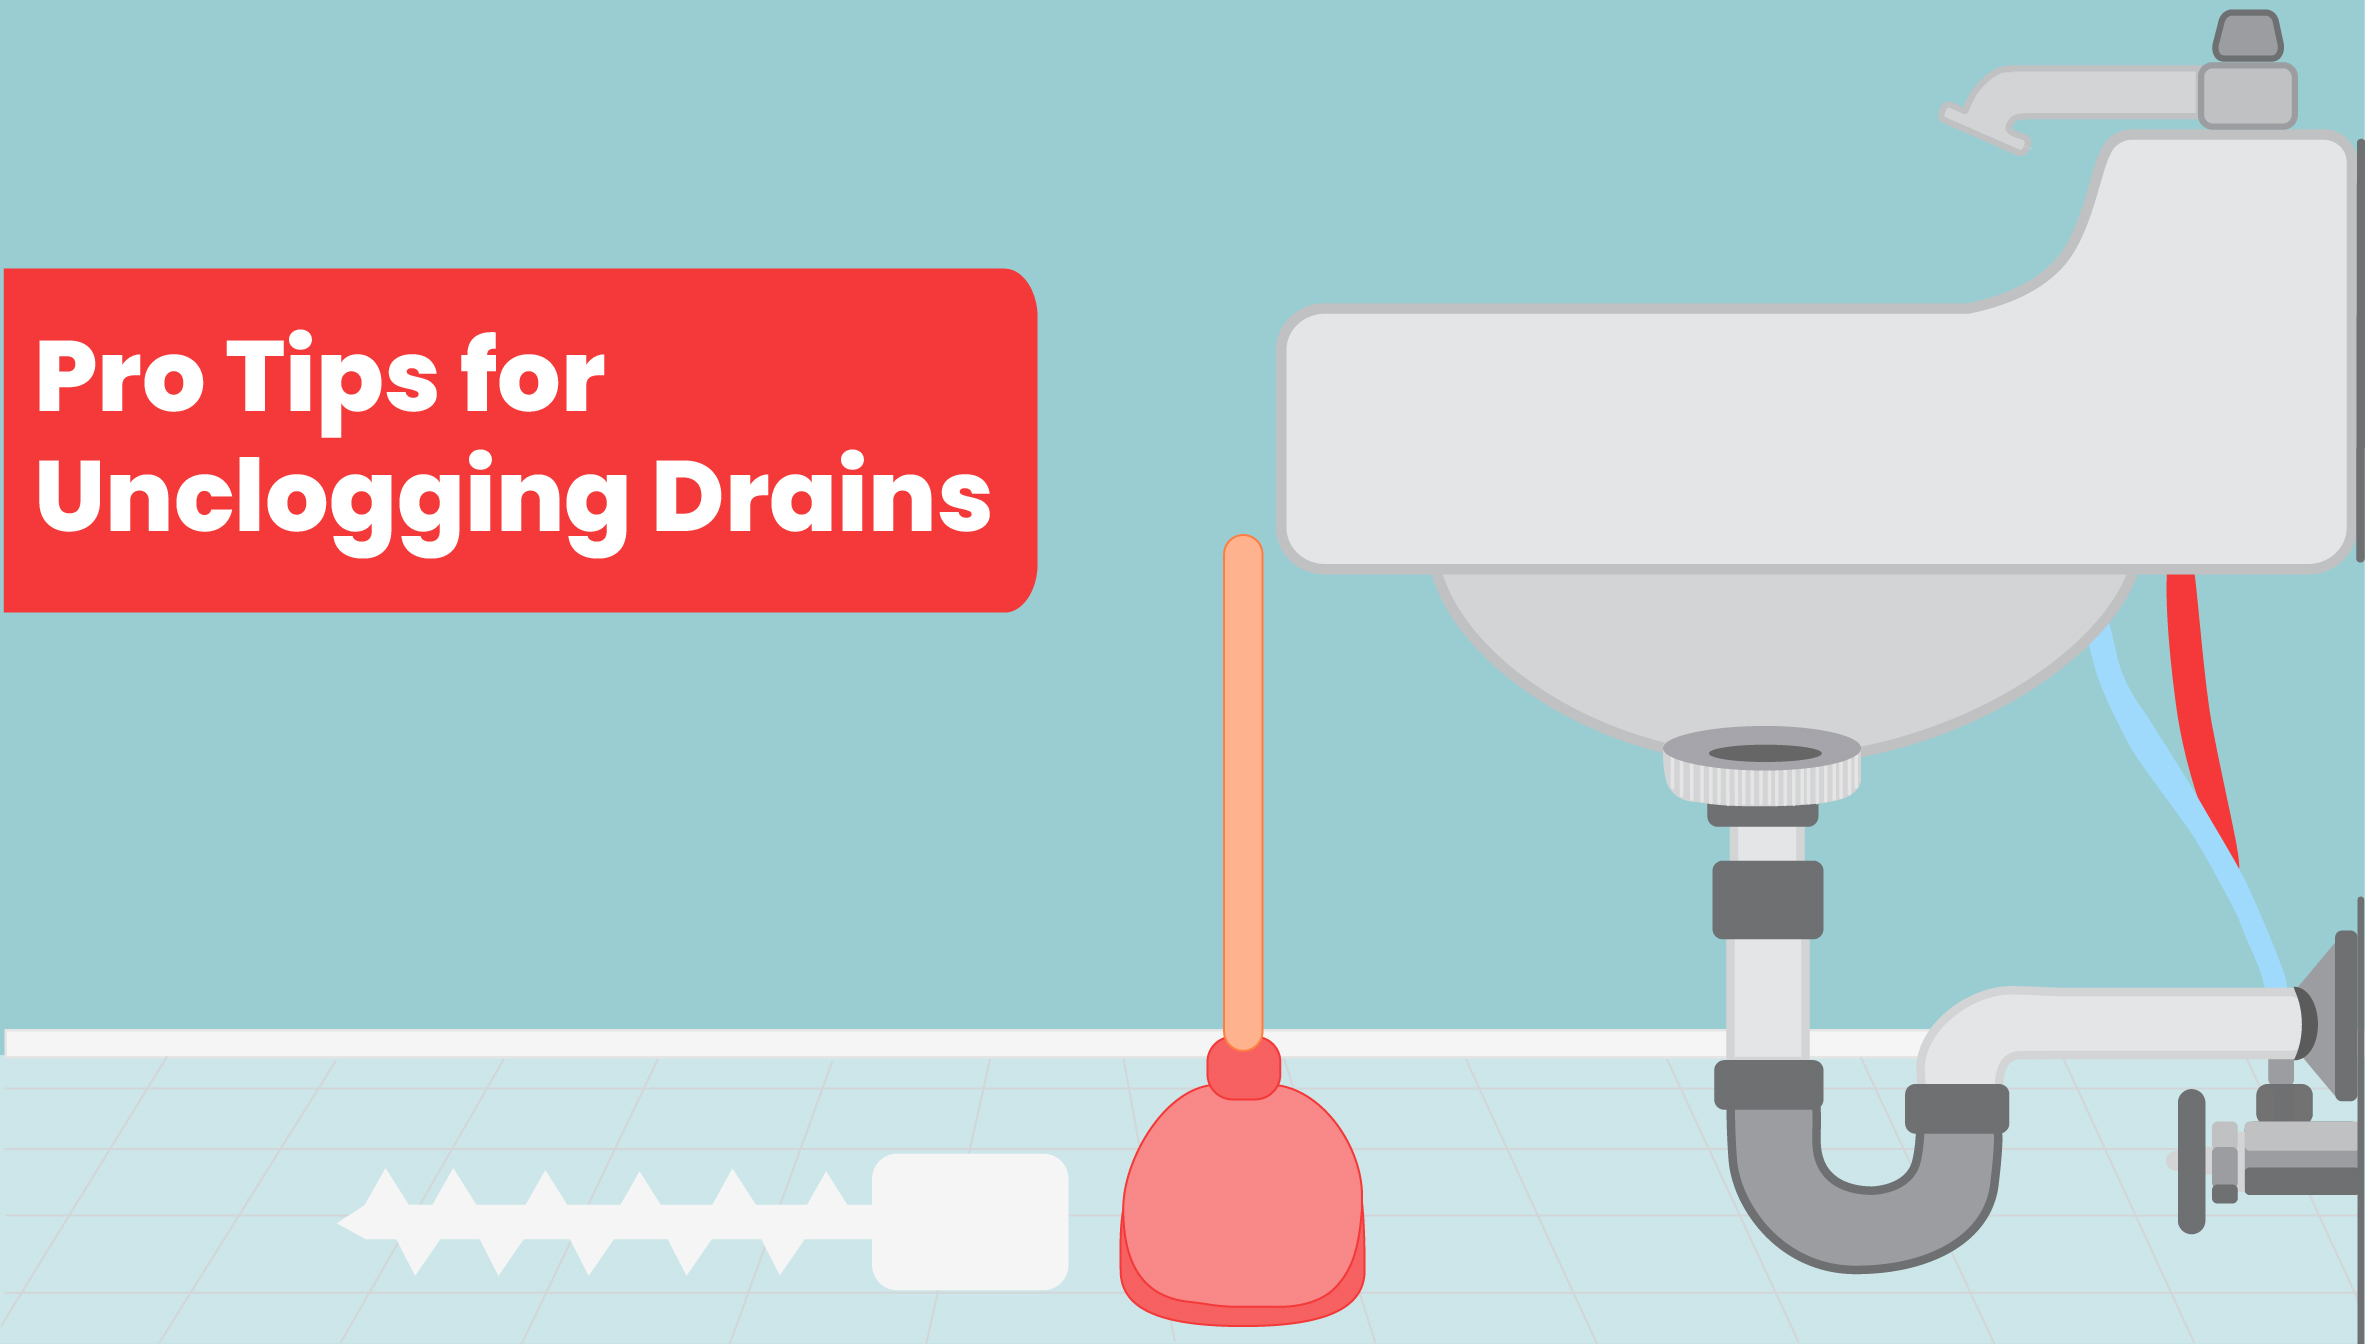 How To Unclog Drains Pro Tips 